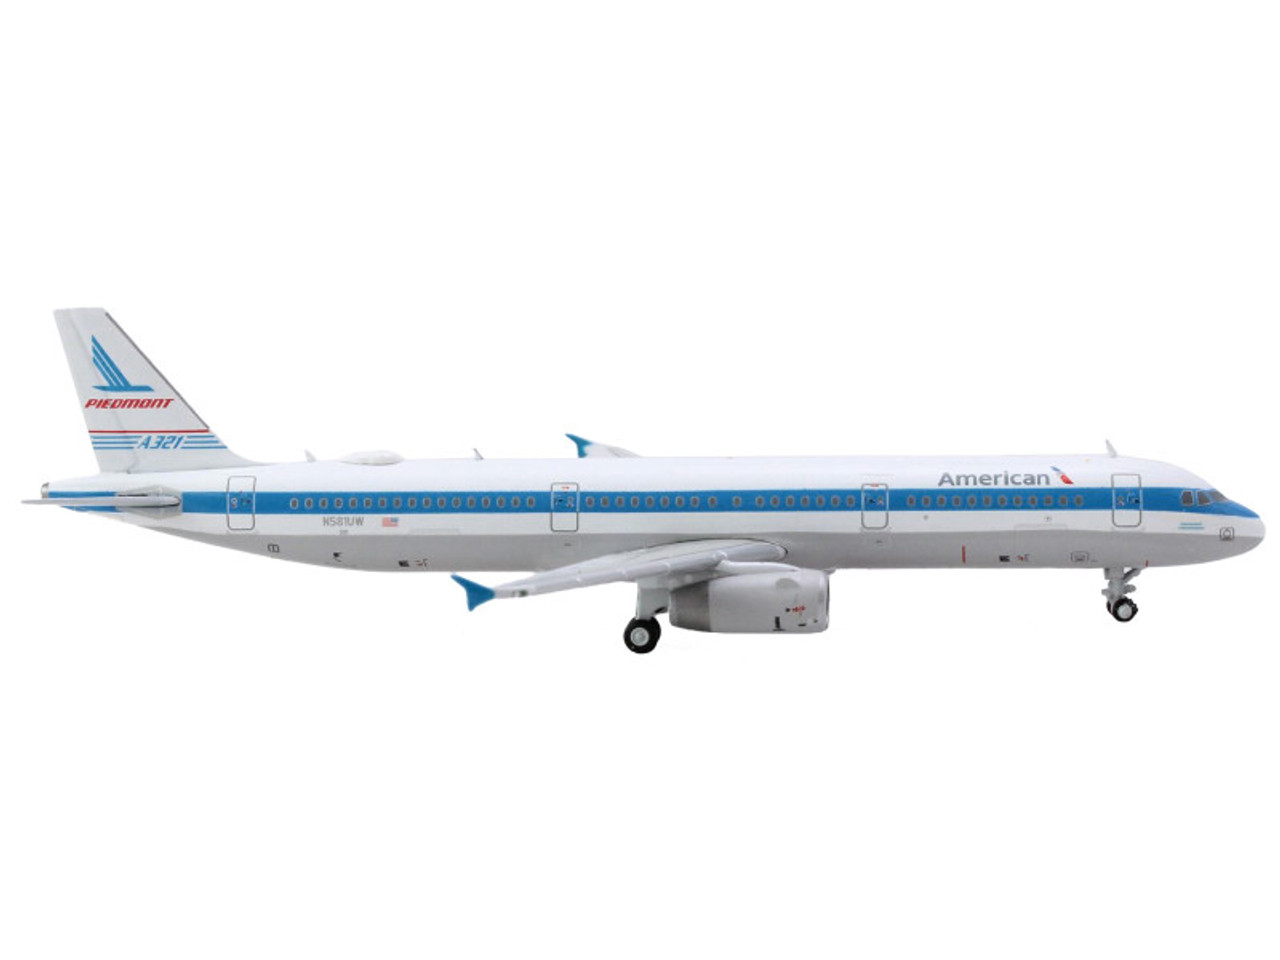 Airbus A321 Commercial Aircraft "American Airlines - Piedmont" (N581UW) White with Blue Stripes 1/400 Diecast Model Airplane by GeminiJets